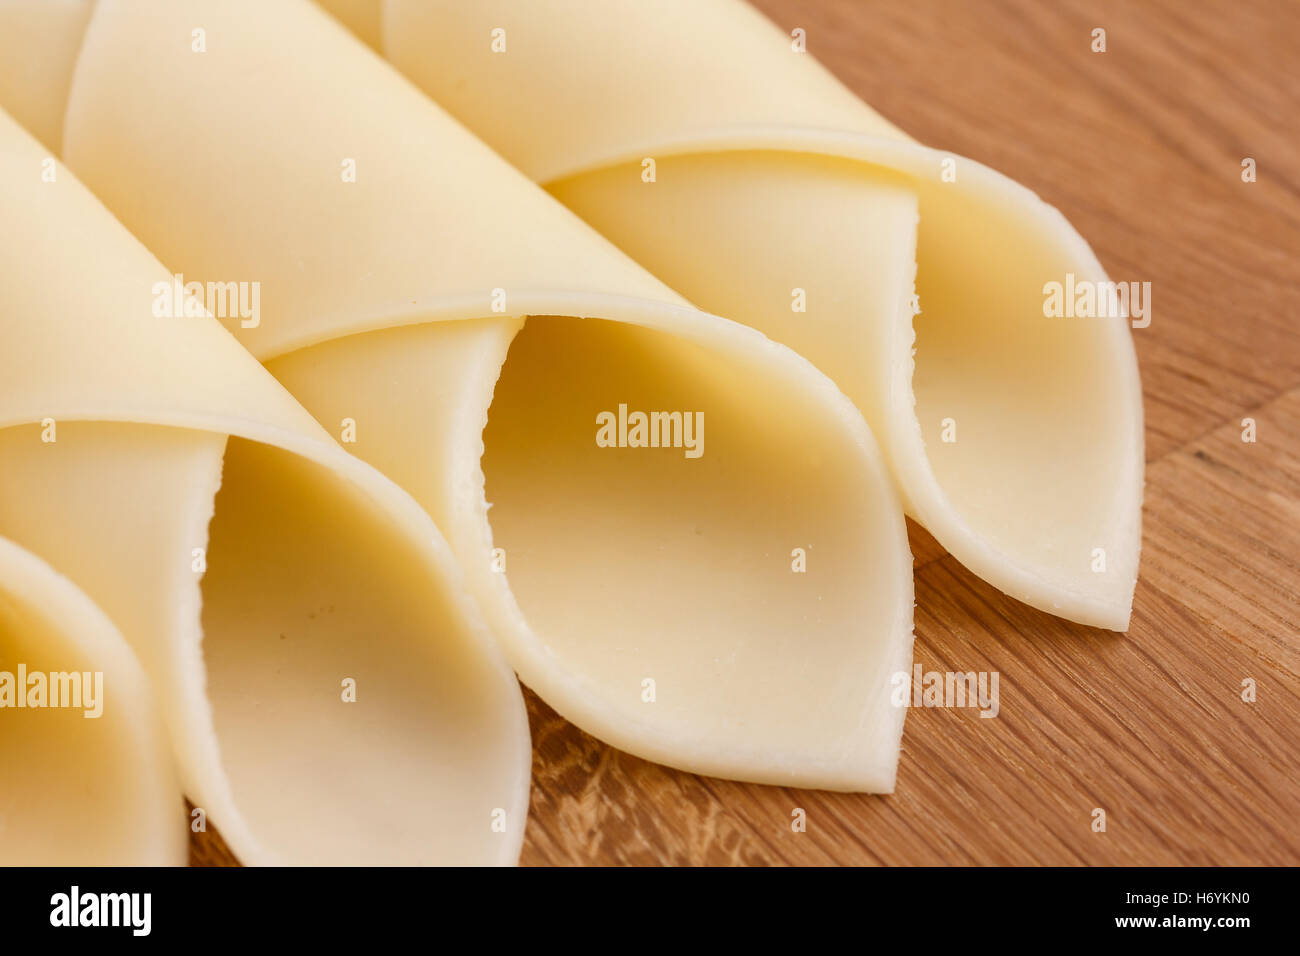 Wrapped yellow cheese slices arranged on a wood surface. Stock Photo